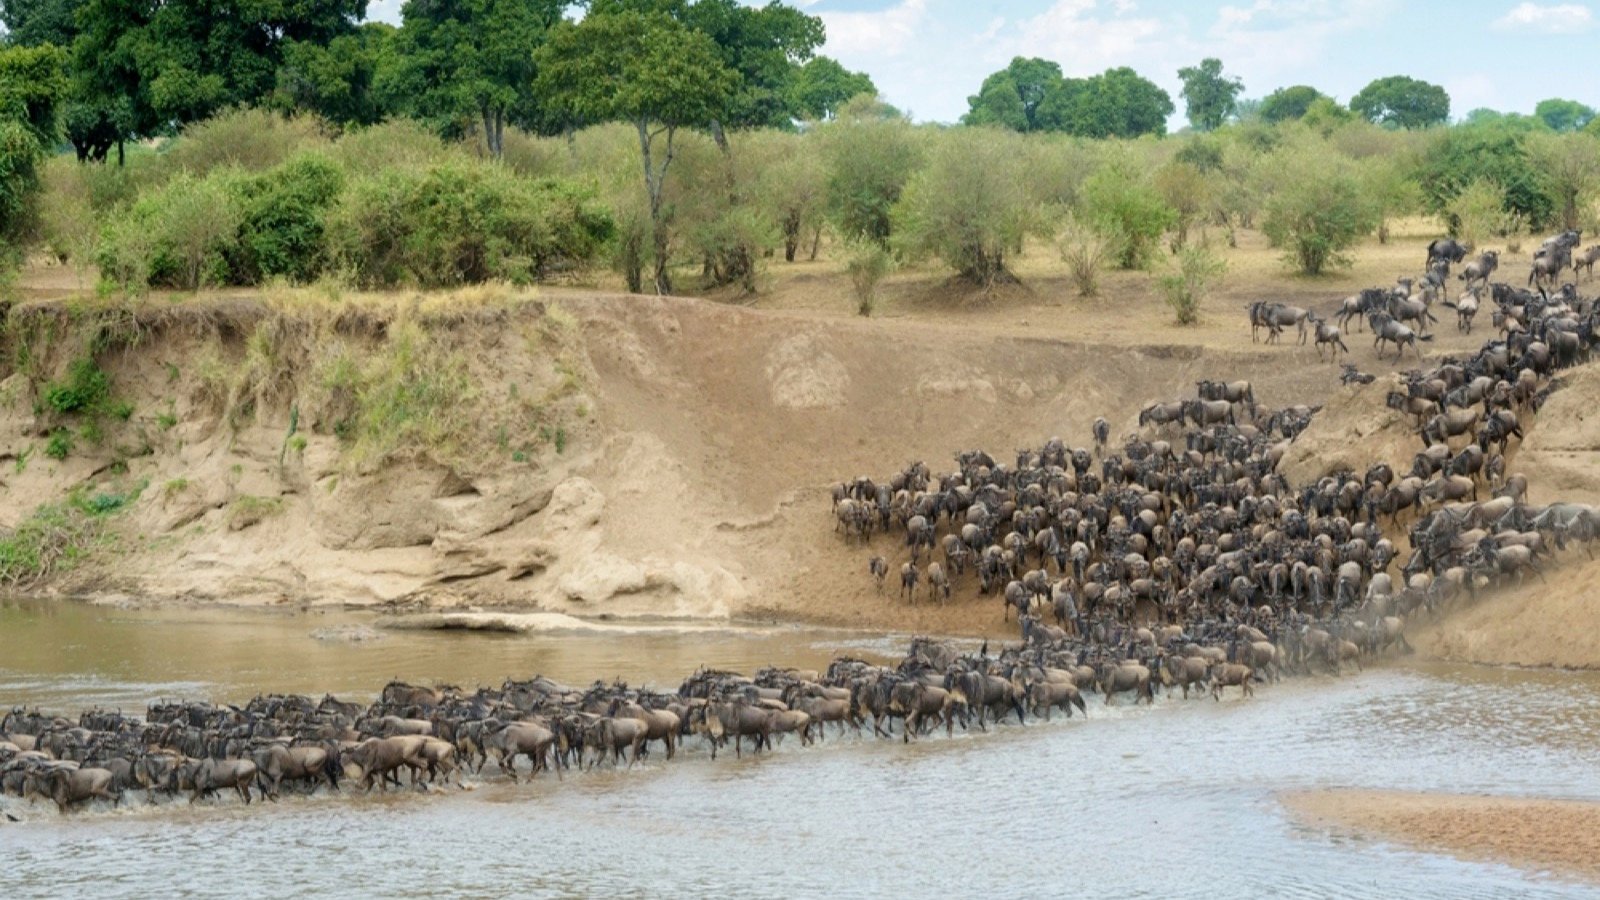 <p>Wildebeest herds migrate across the Mara River in the southern Serengeti each year between June and October. The enormous herd travels across the plains following the rains to reach the lush grass. They must navigate through big cat territory. It’s a once-in-a-lifetime visually spectacular wildlife experience.</p><p>If you prefer watching the less dramatic calving period, the best time to visit is in March.</p>